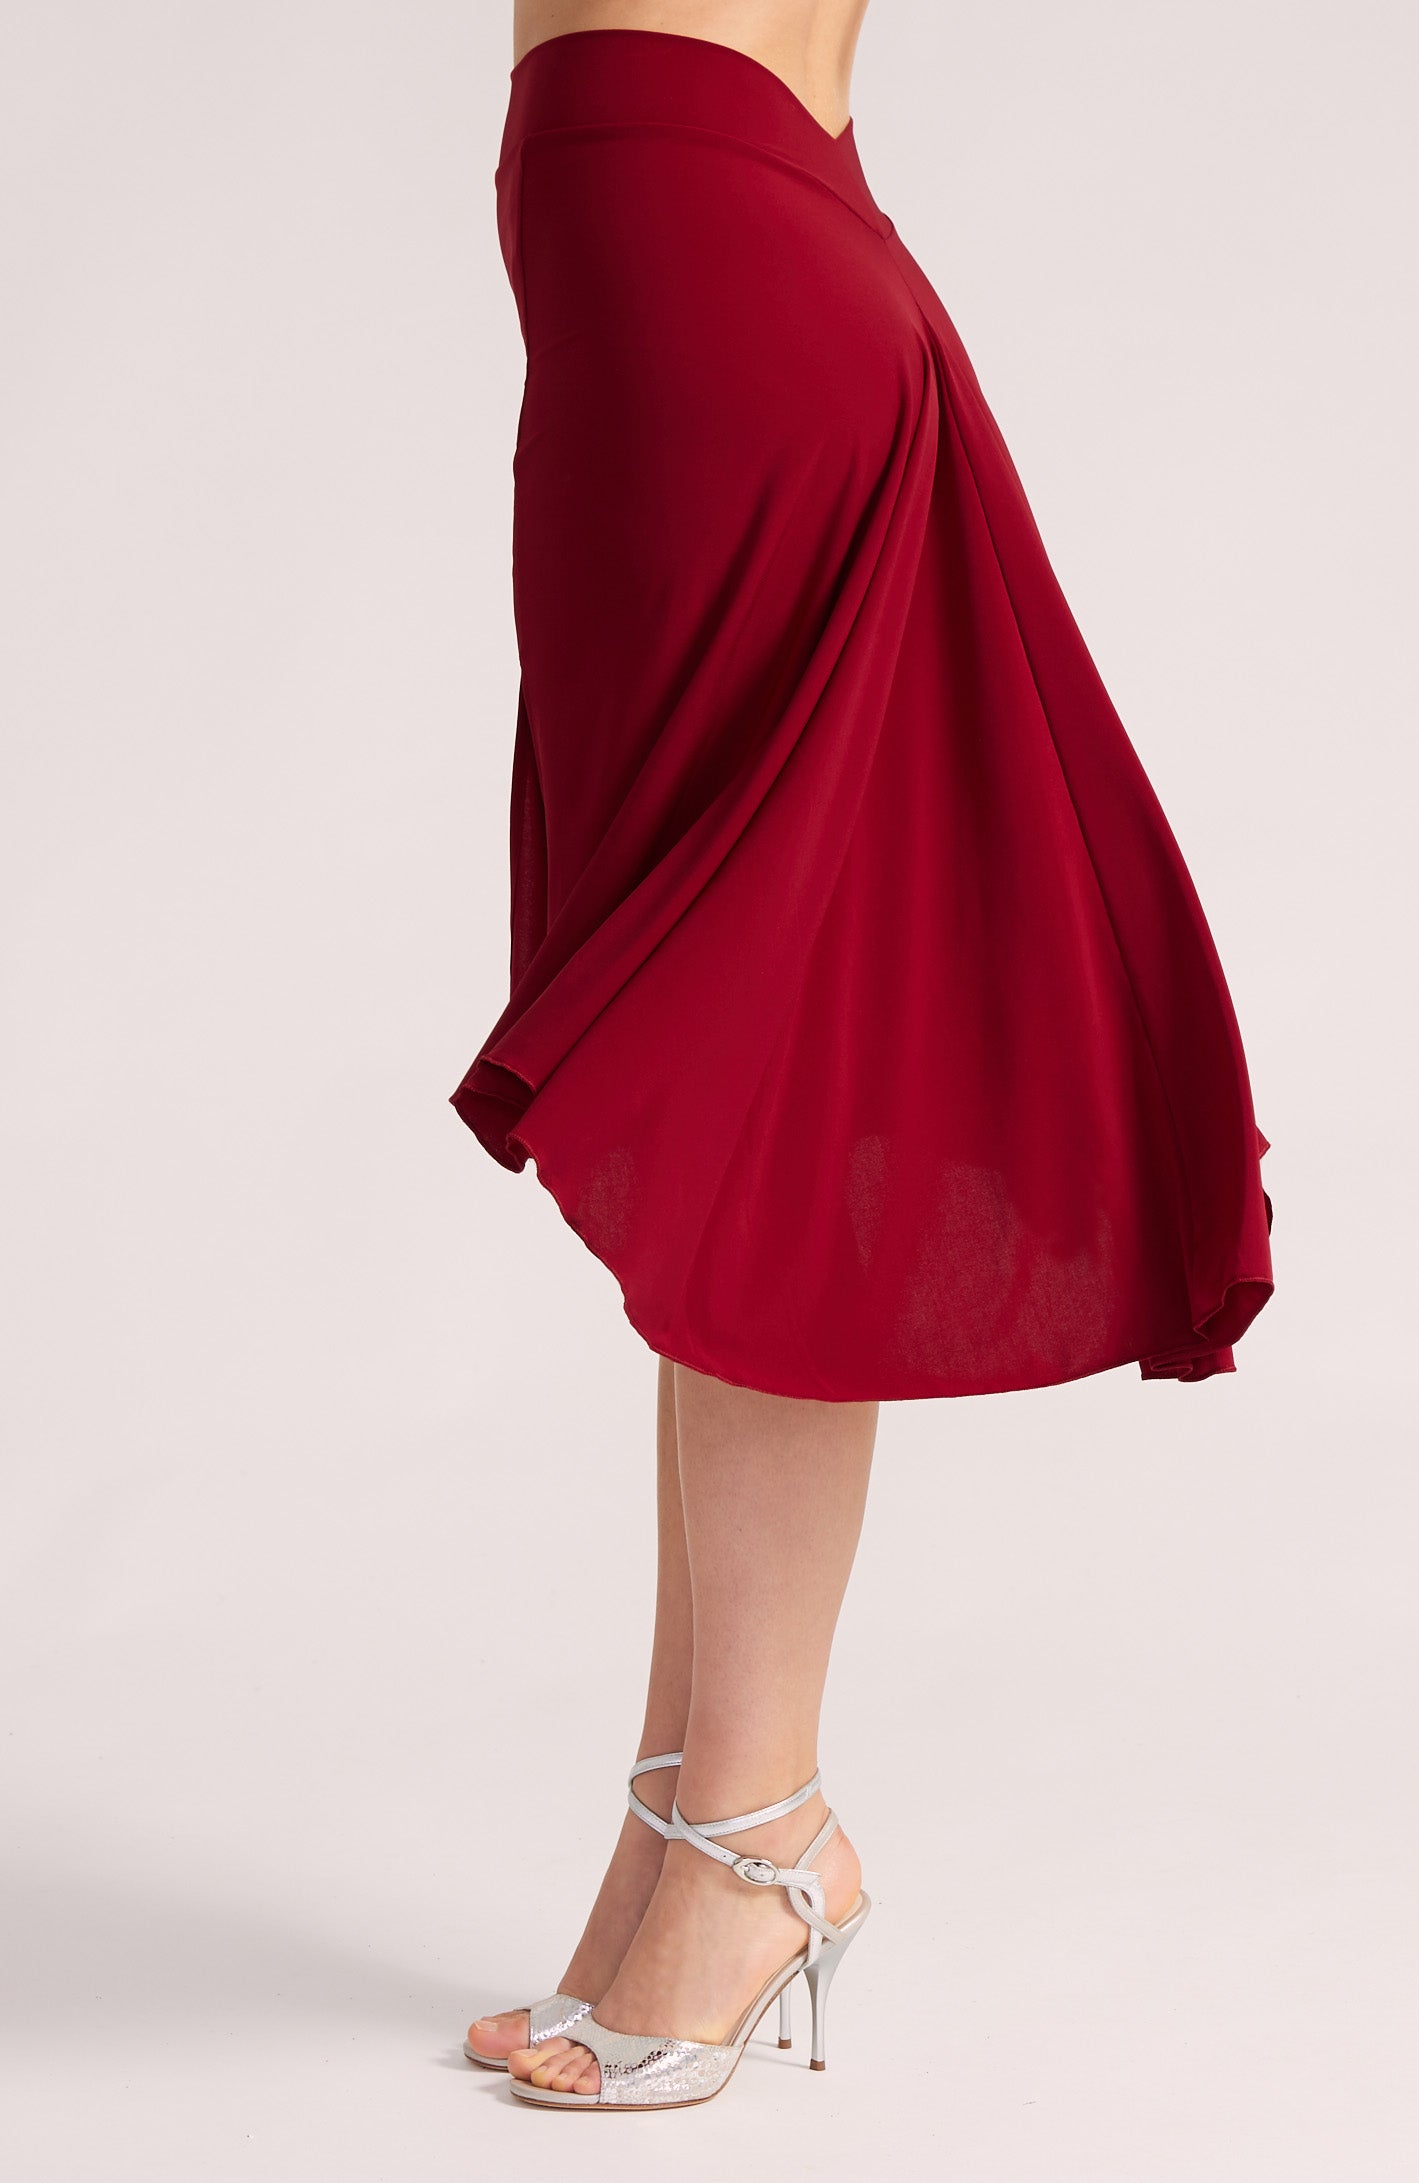 PAOLA - Berry Red Argentine Tango Skirt (with Slit)